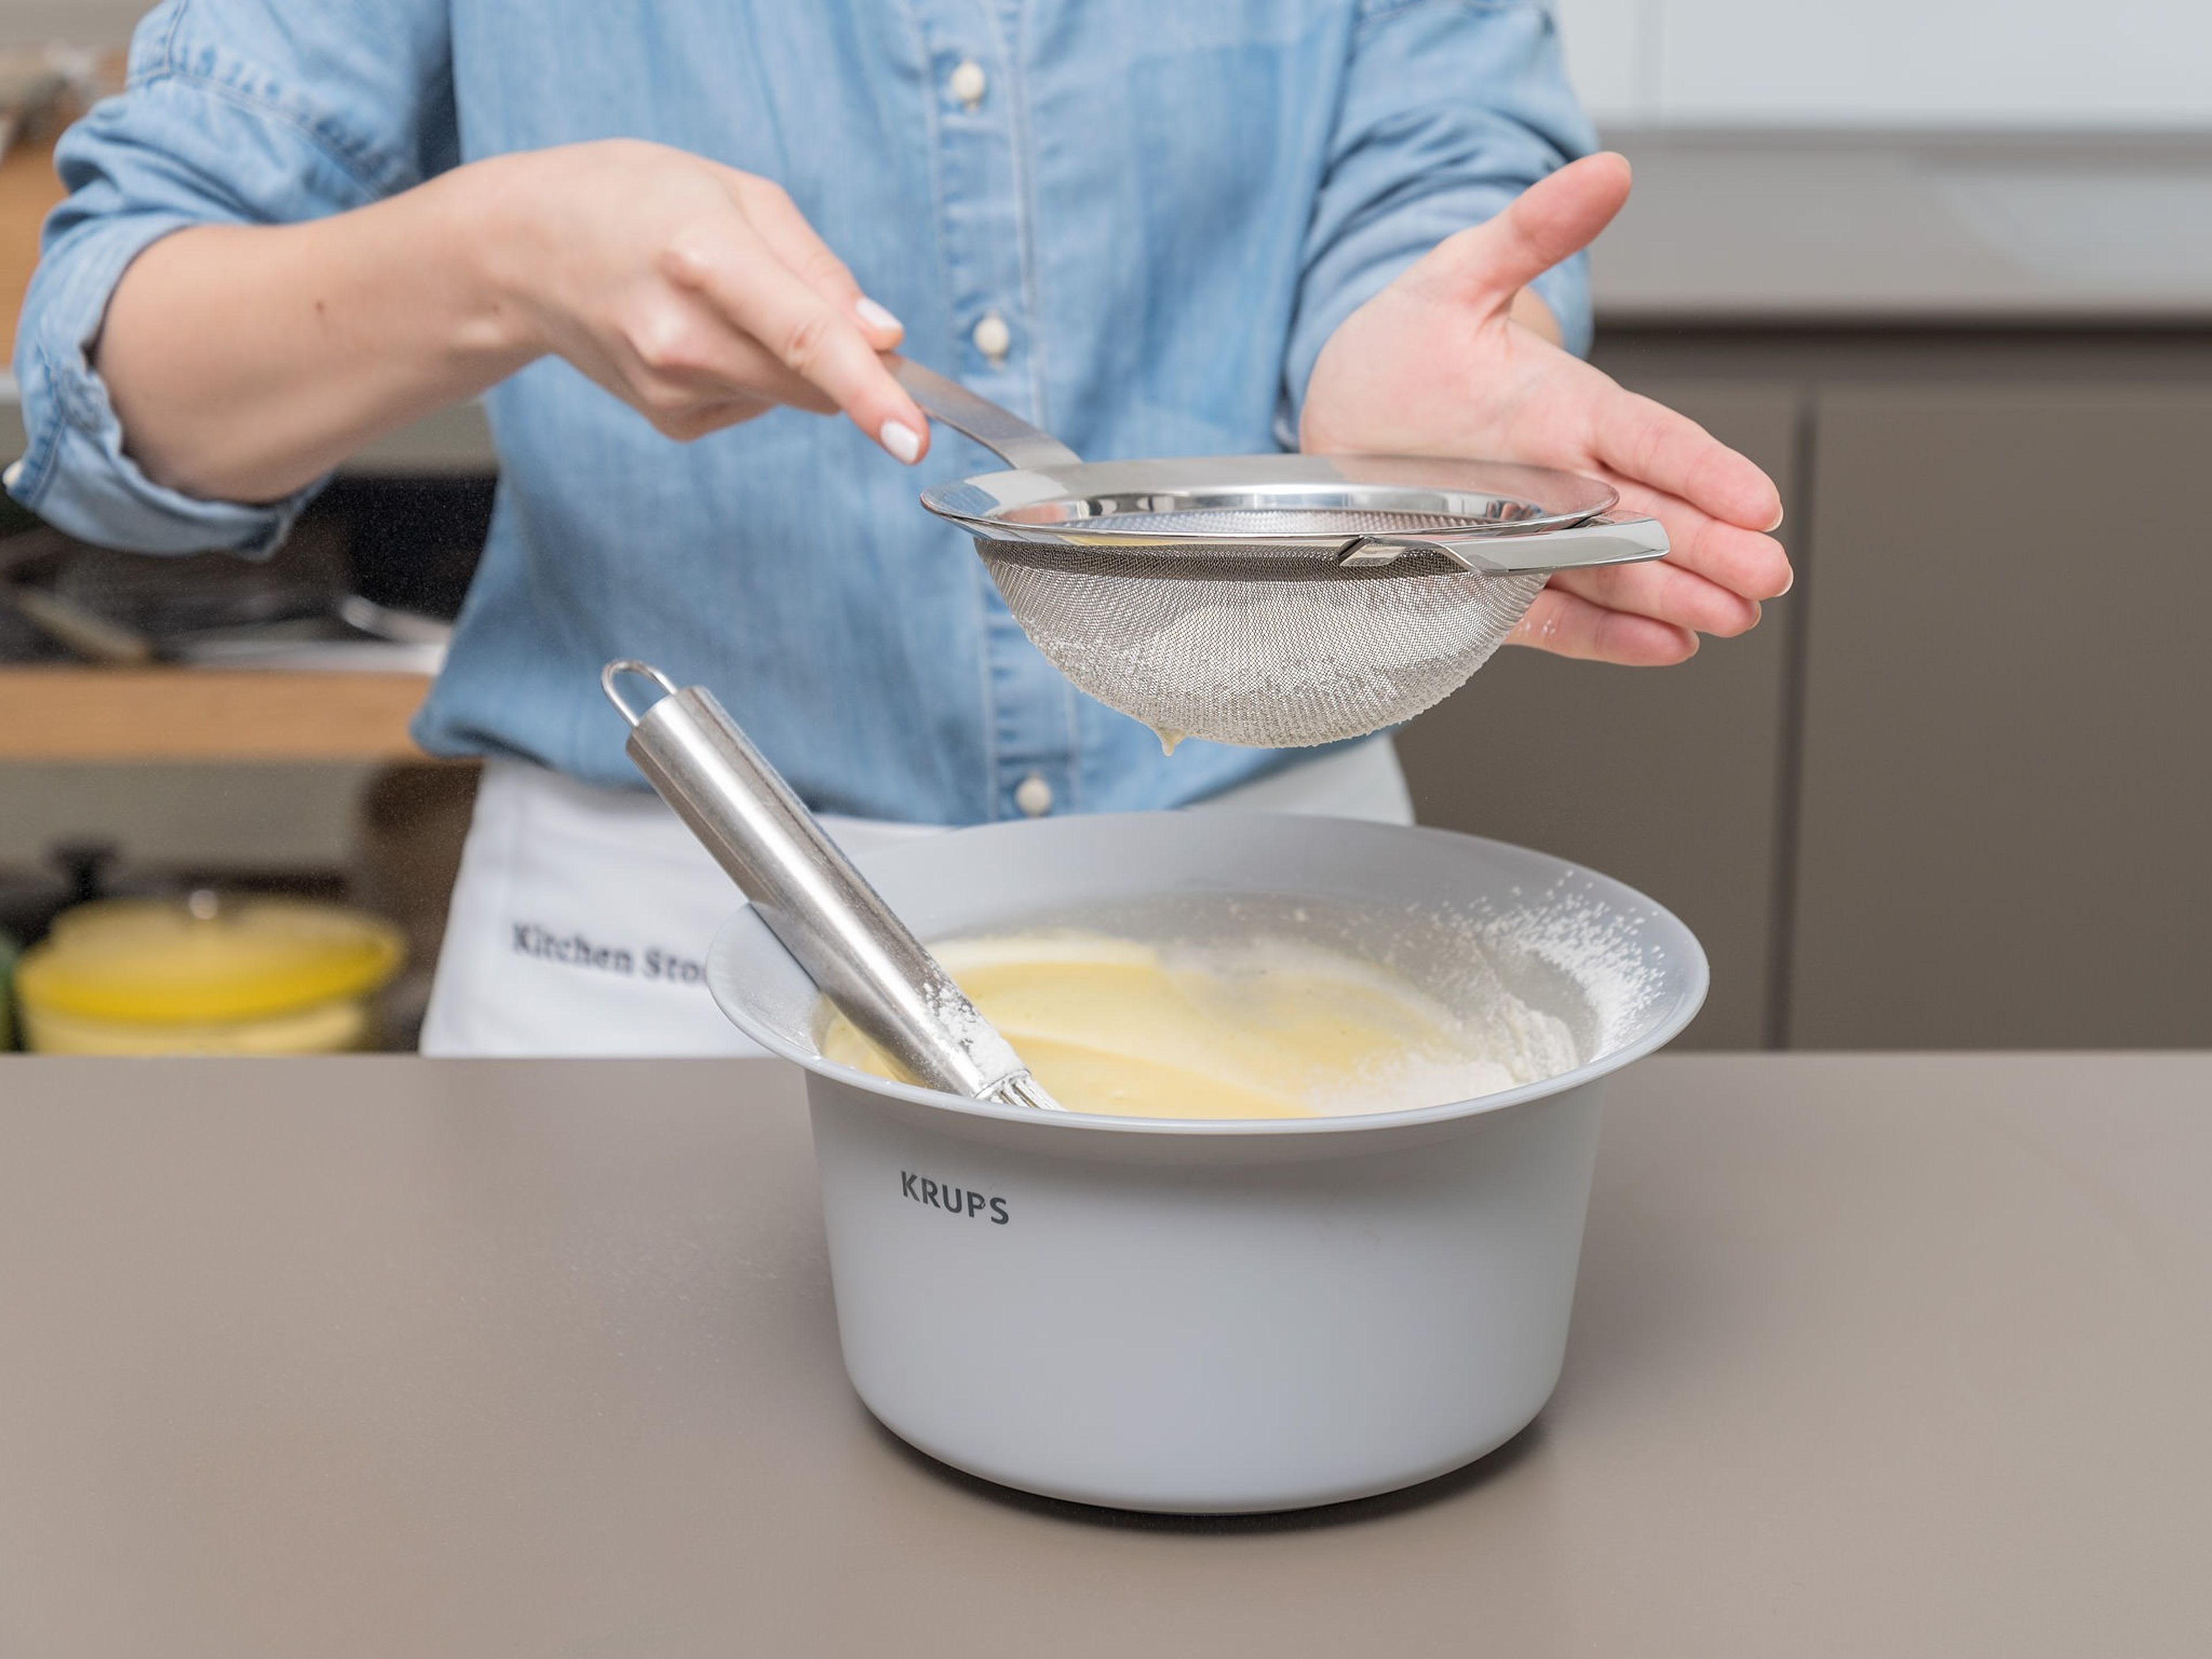 Mix flour and starch together and sieve over egg mixture in 3 – 4 batches. Carefully fold into egg mixture. Transfer batter to a parchment-lined baking pan and bake at 190°C/375°F for approx. 11 – 13 min., or until golden brown.